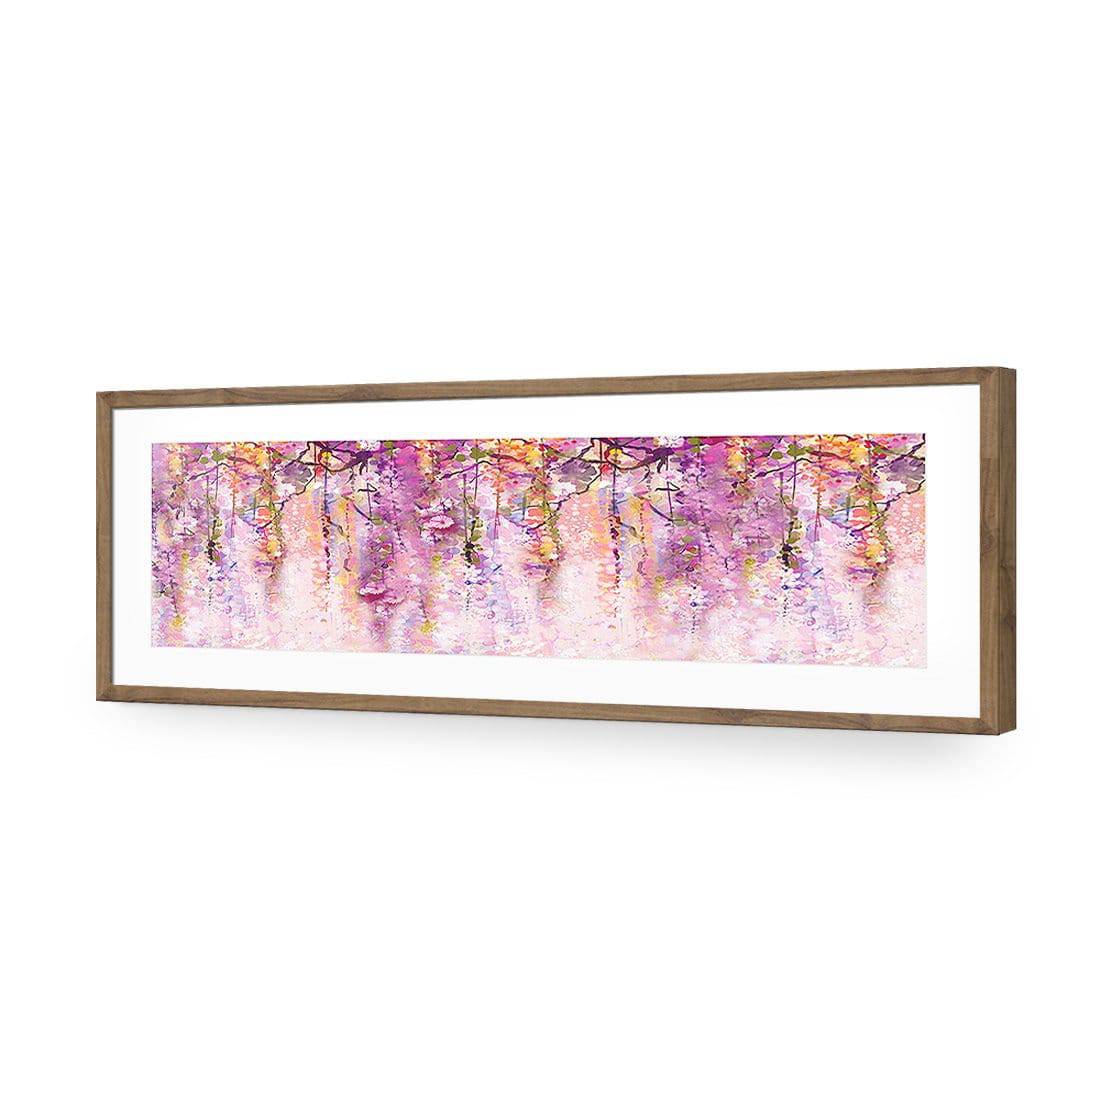 Lilac Dream, Long-Acrylic-Wall Art Design-With Border-Acrylic - Natural Frame-60x20cm-Wall Art Designs